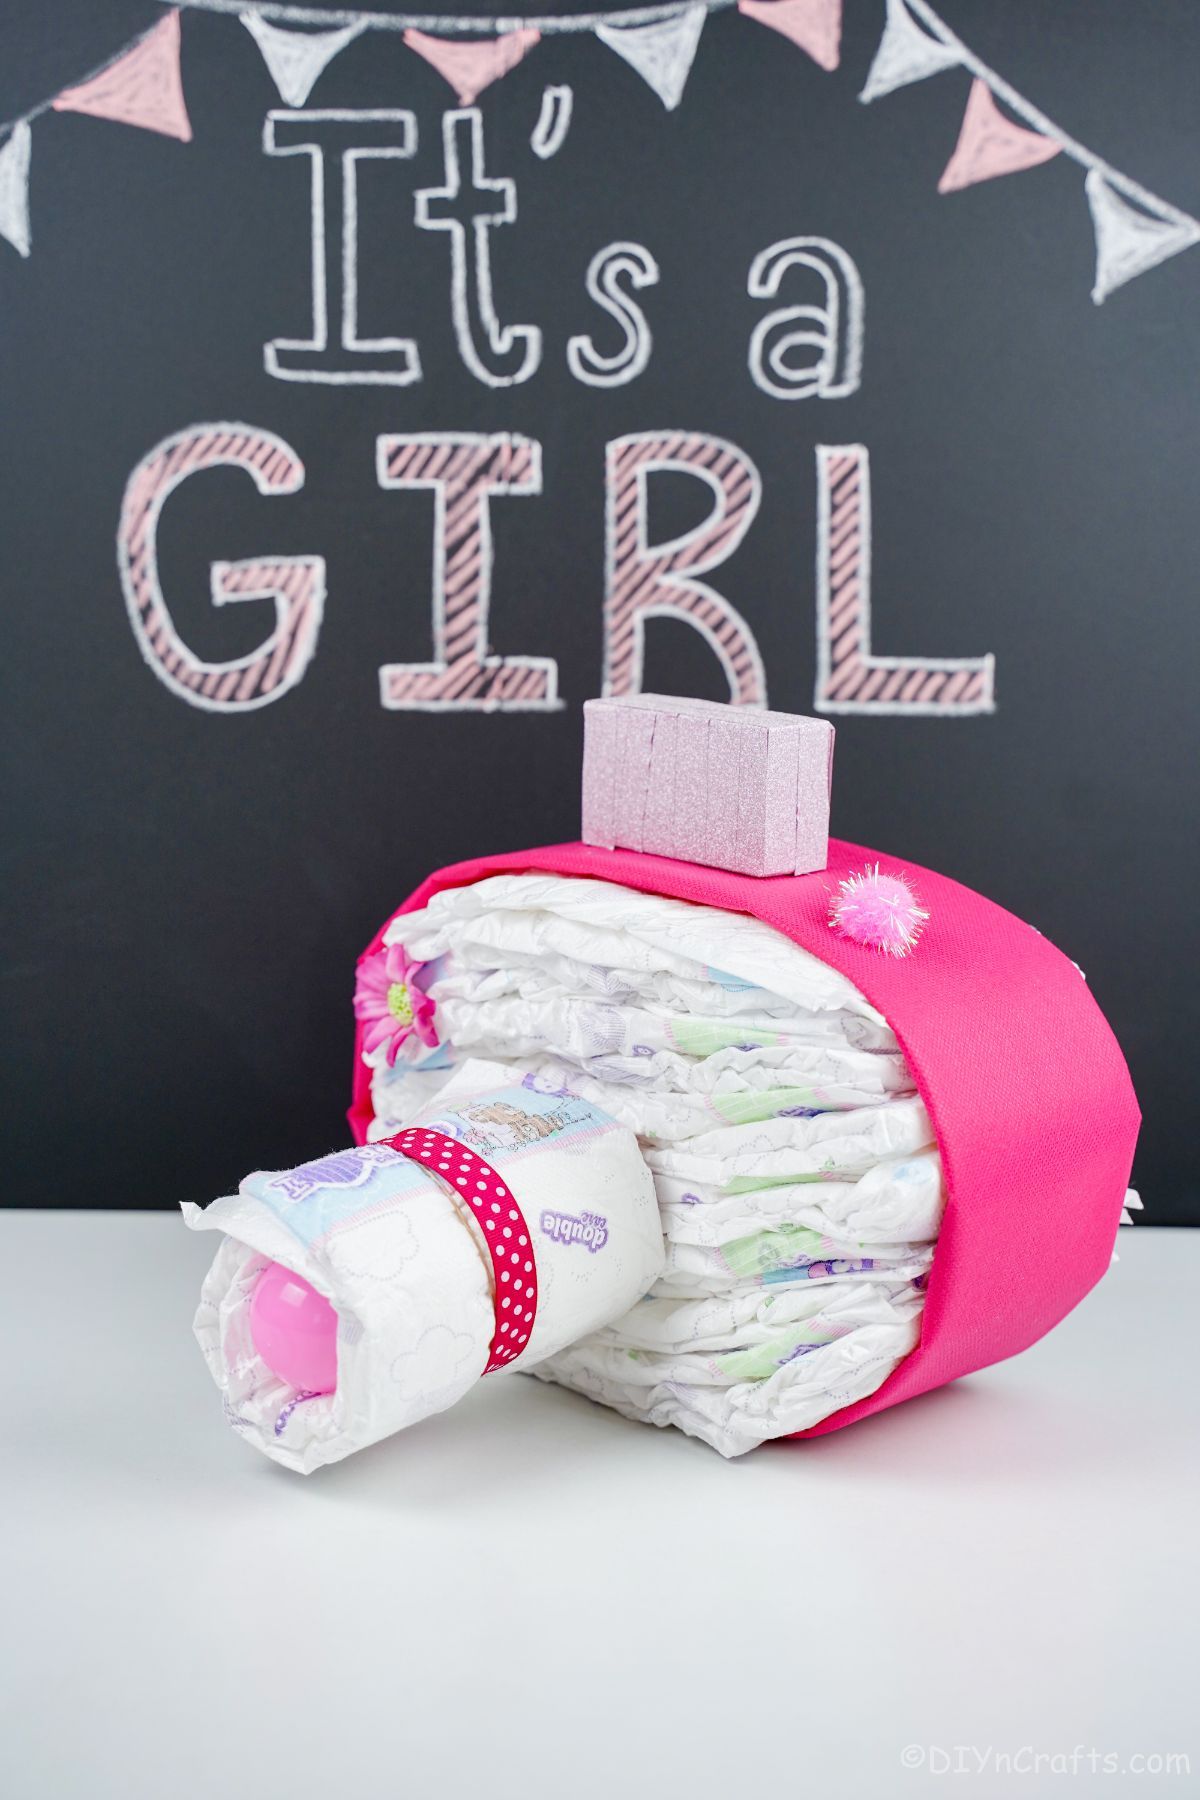 pink camera diaper cake on white table with chalkboard in background